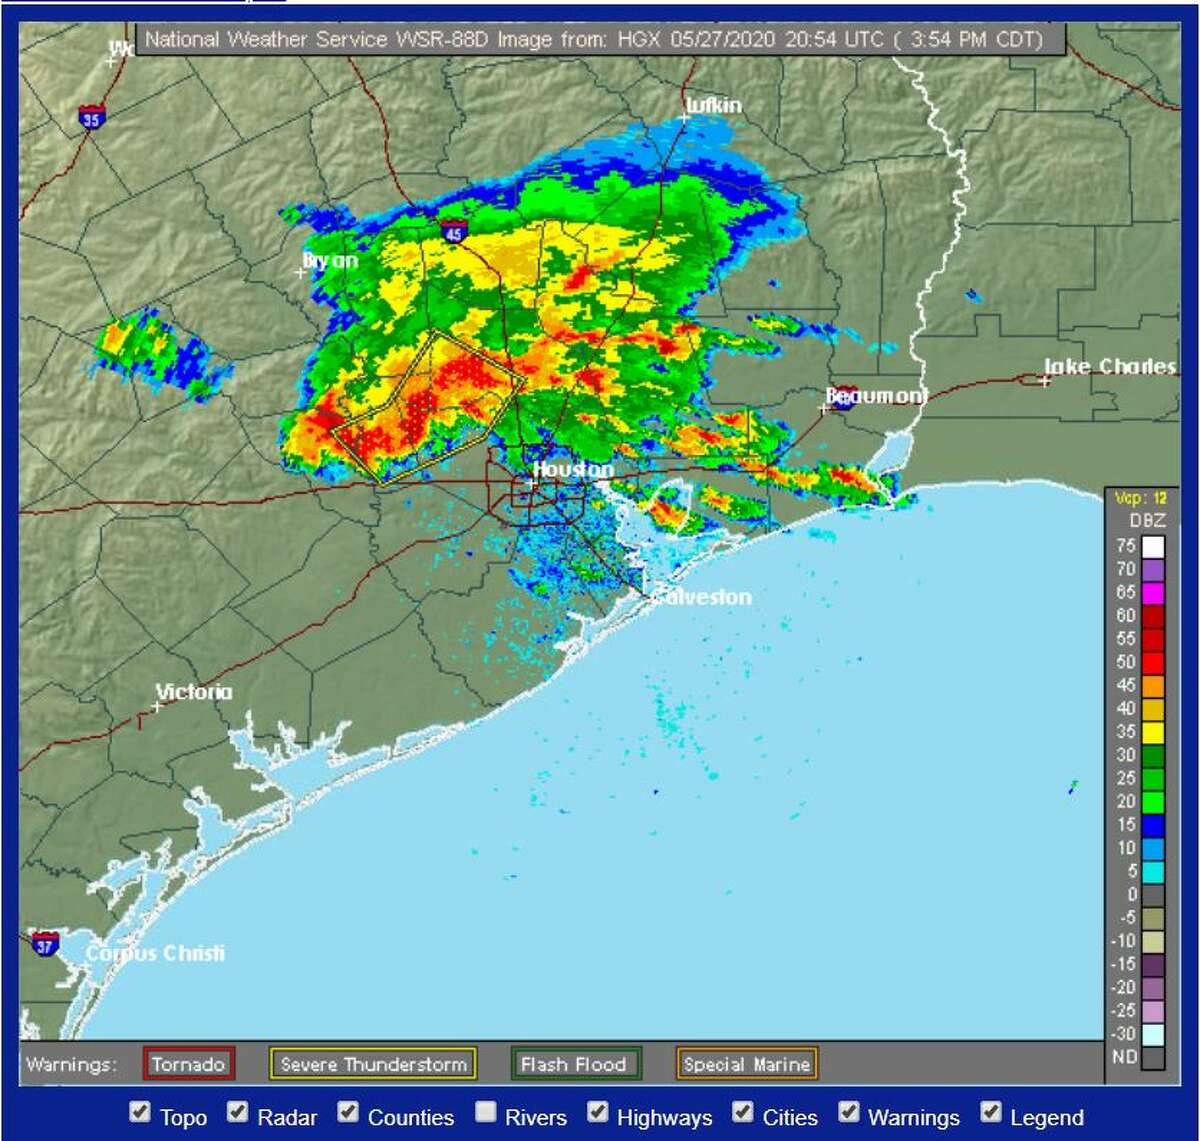 Severe storms approach Houston area, watch in effect until 9 p.m.